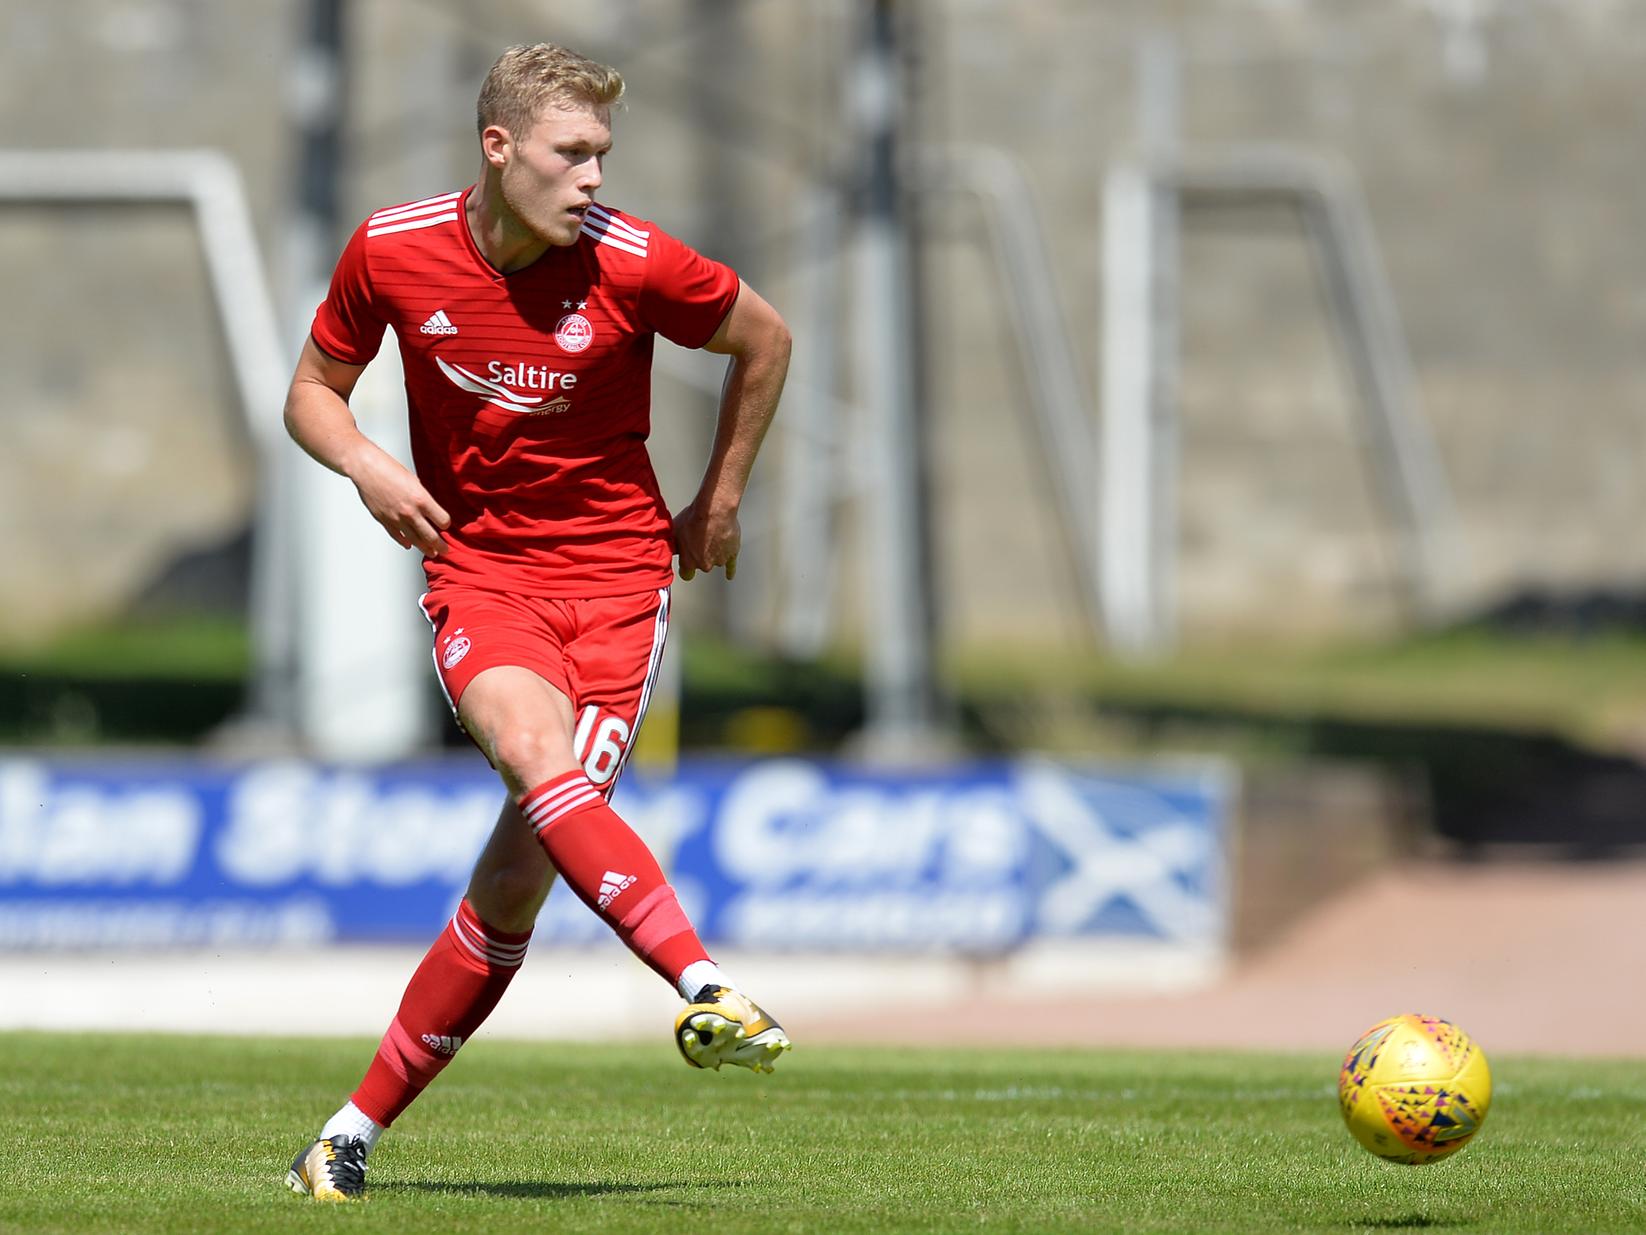 Both Middlesbrough and Derby County are rumoured to be chasing Aberdeen goal-machine Sam Cosgrove. The 22-year-old has been tearing it up in the Scottish Premiership this season, netting 15 goals in 17 matches. (Team Talk)